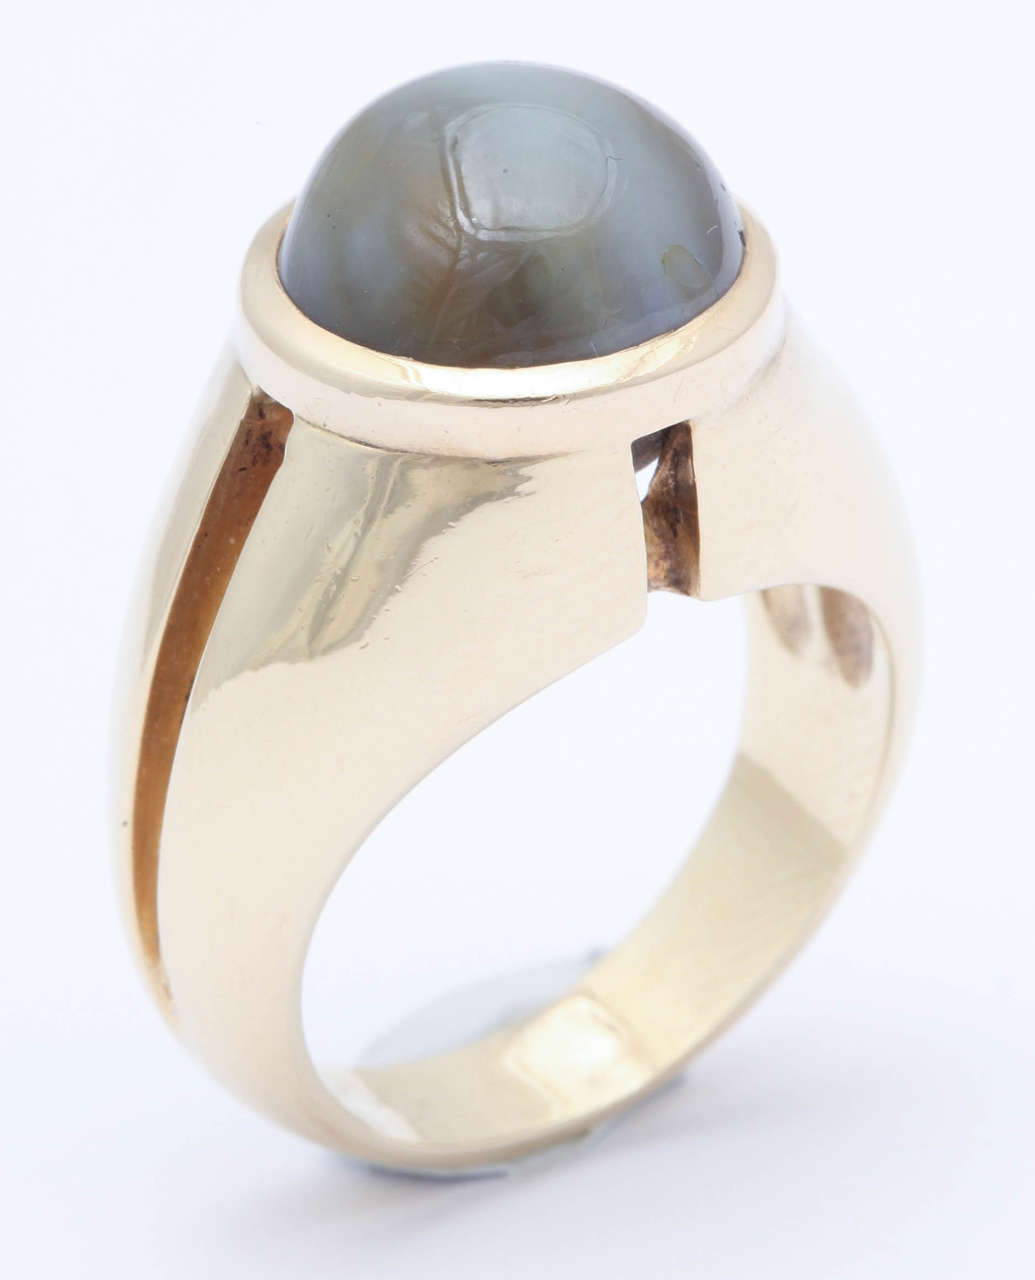 A rare and stunning large size men's ring set with a very striking chrysoberyl cats-eye, that these photographs do not do justice to.  The stone exhibits a beautiful streak of silky light passing through the center, and a wonderful overall colour.